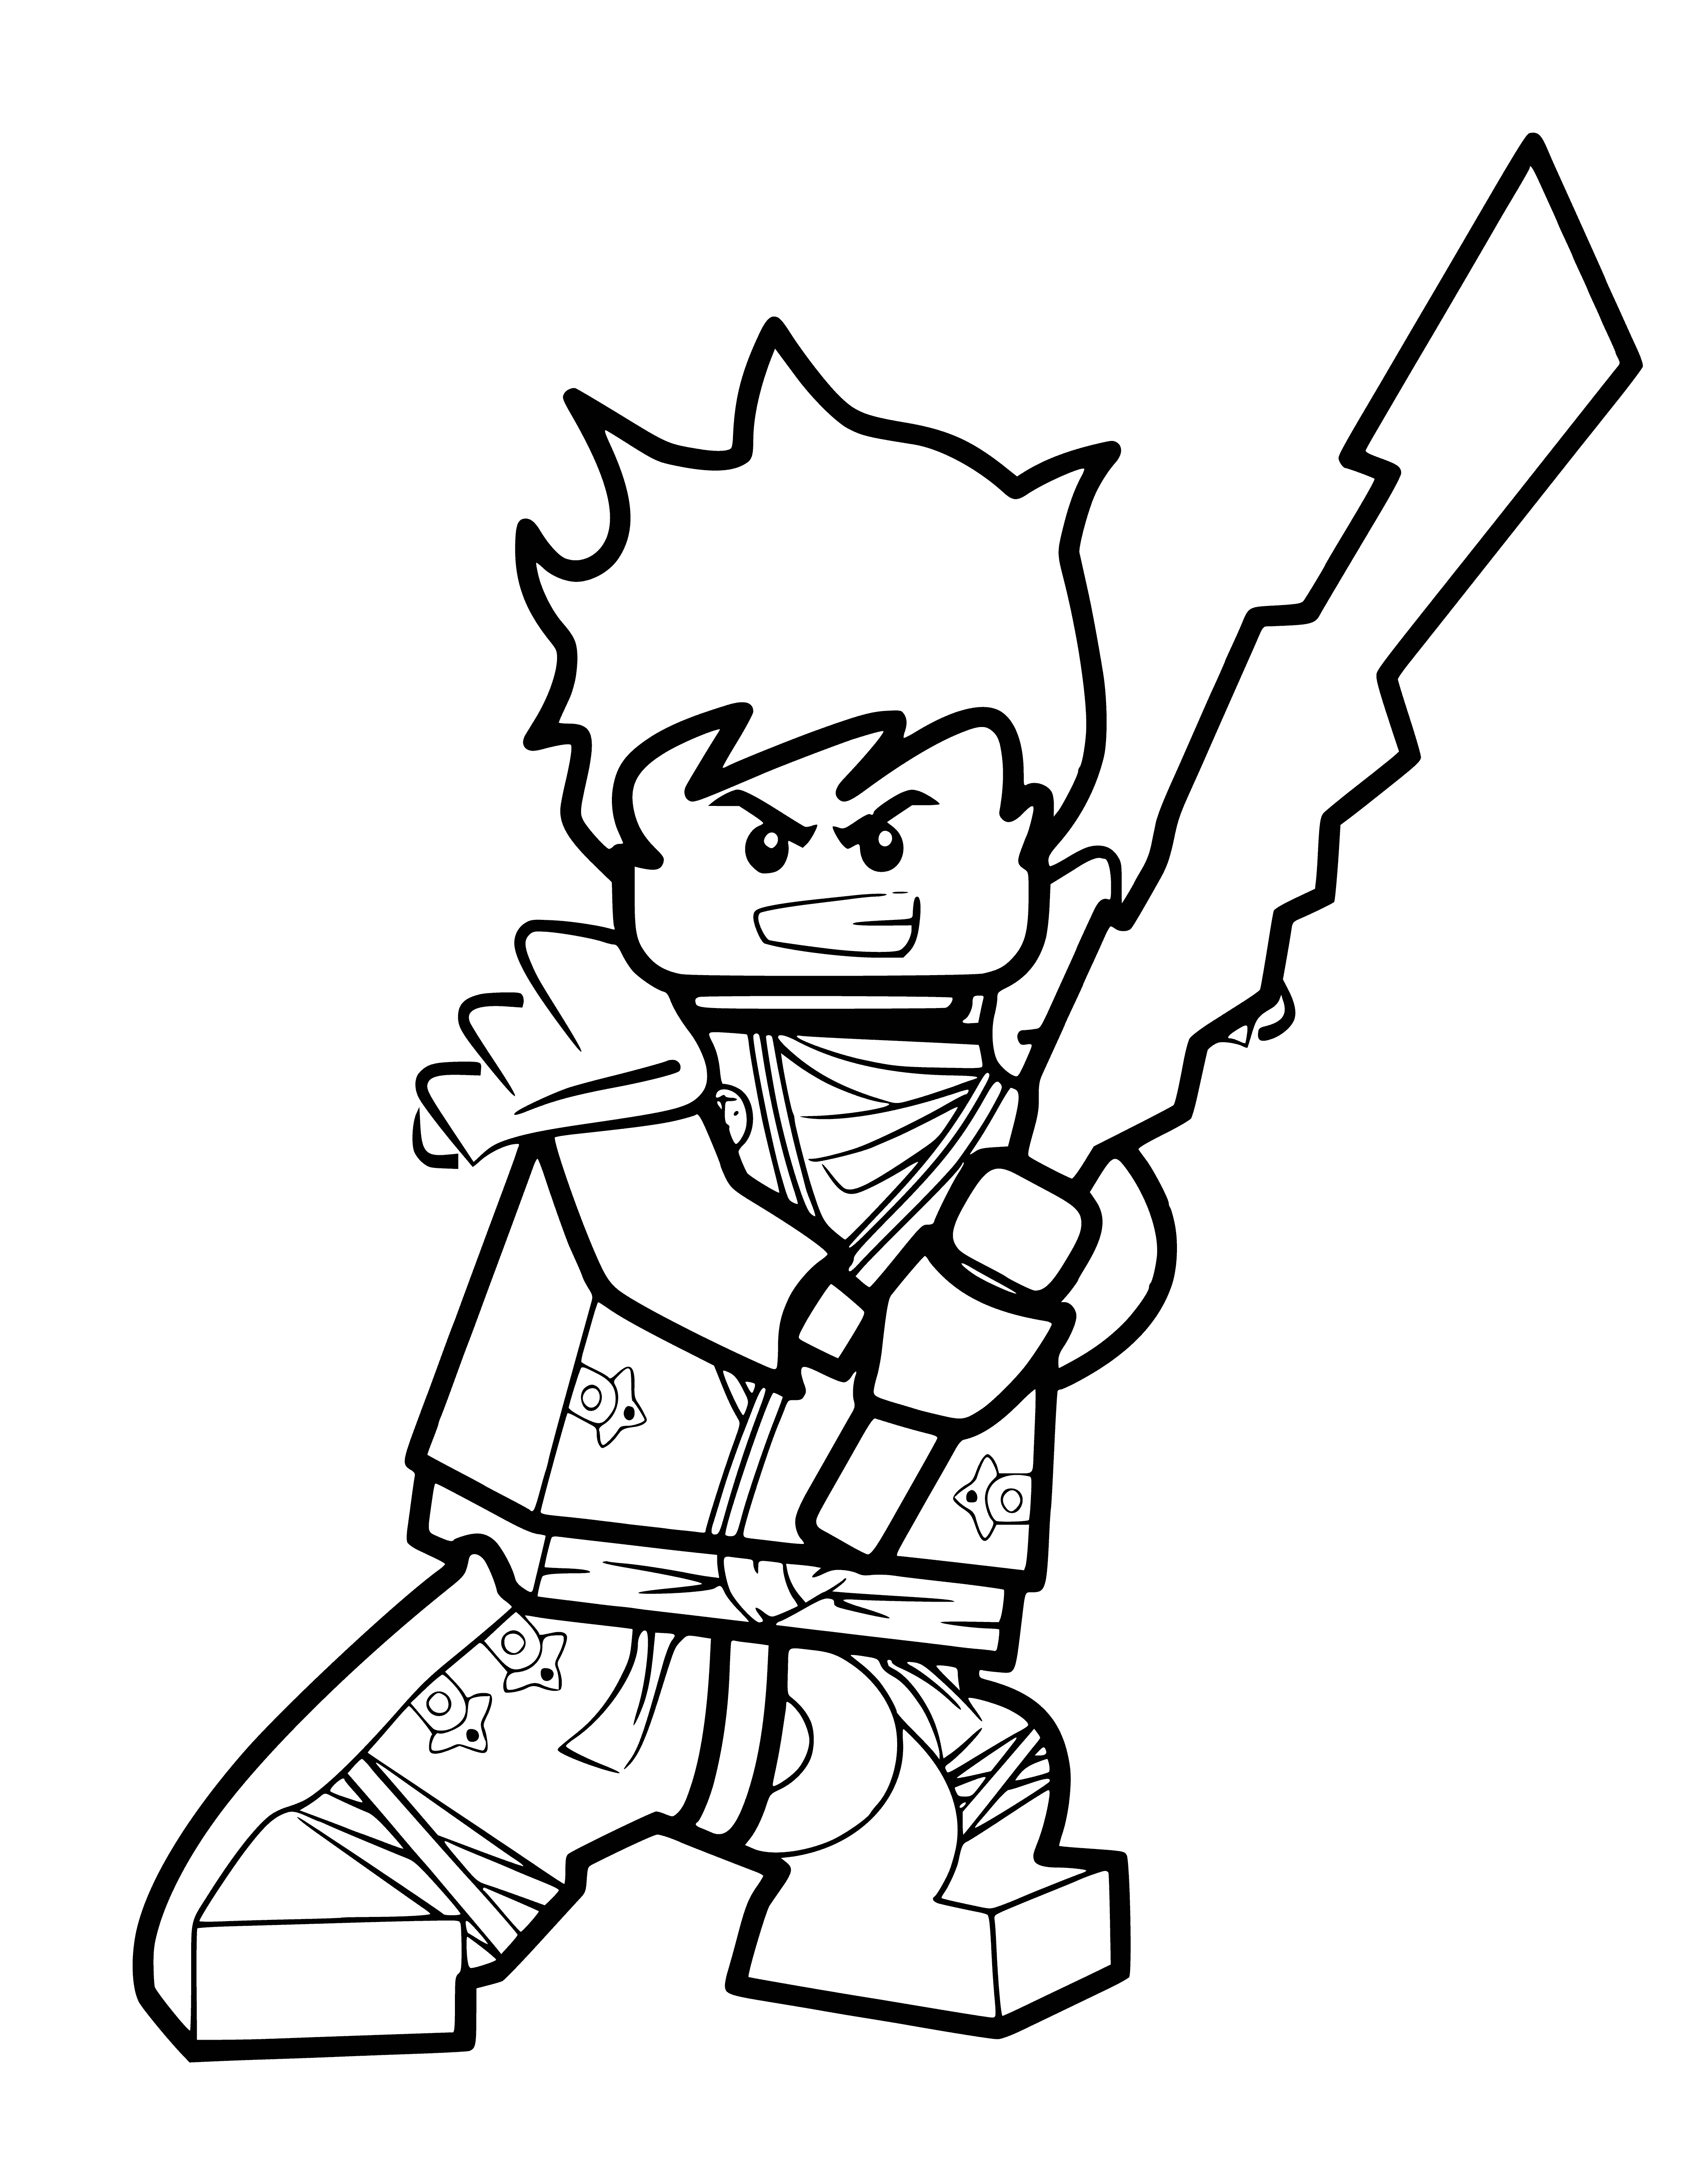 coloring page: Young man in ninja outfit holding golden sword poses in martial arts stance.